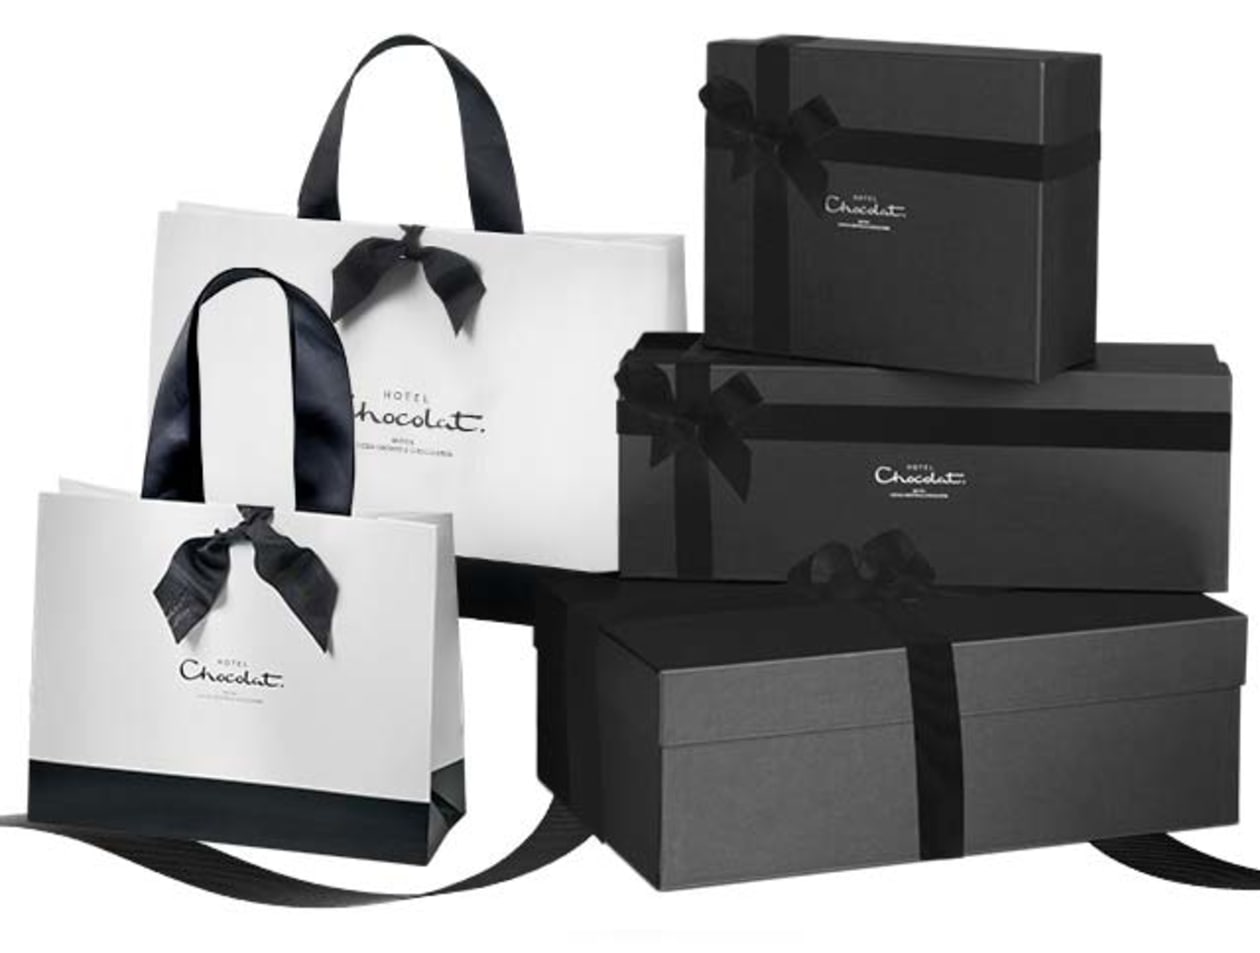 build up I reckon curl Gift Wrapping & Delivery | Send Luxury Gifts | Hotel Chocolat